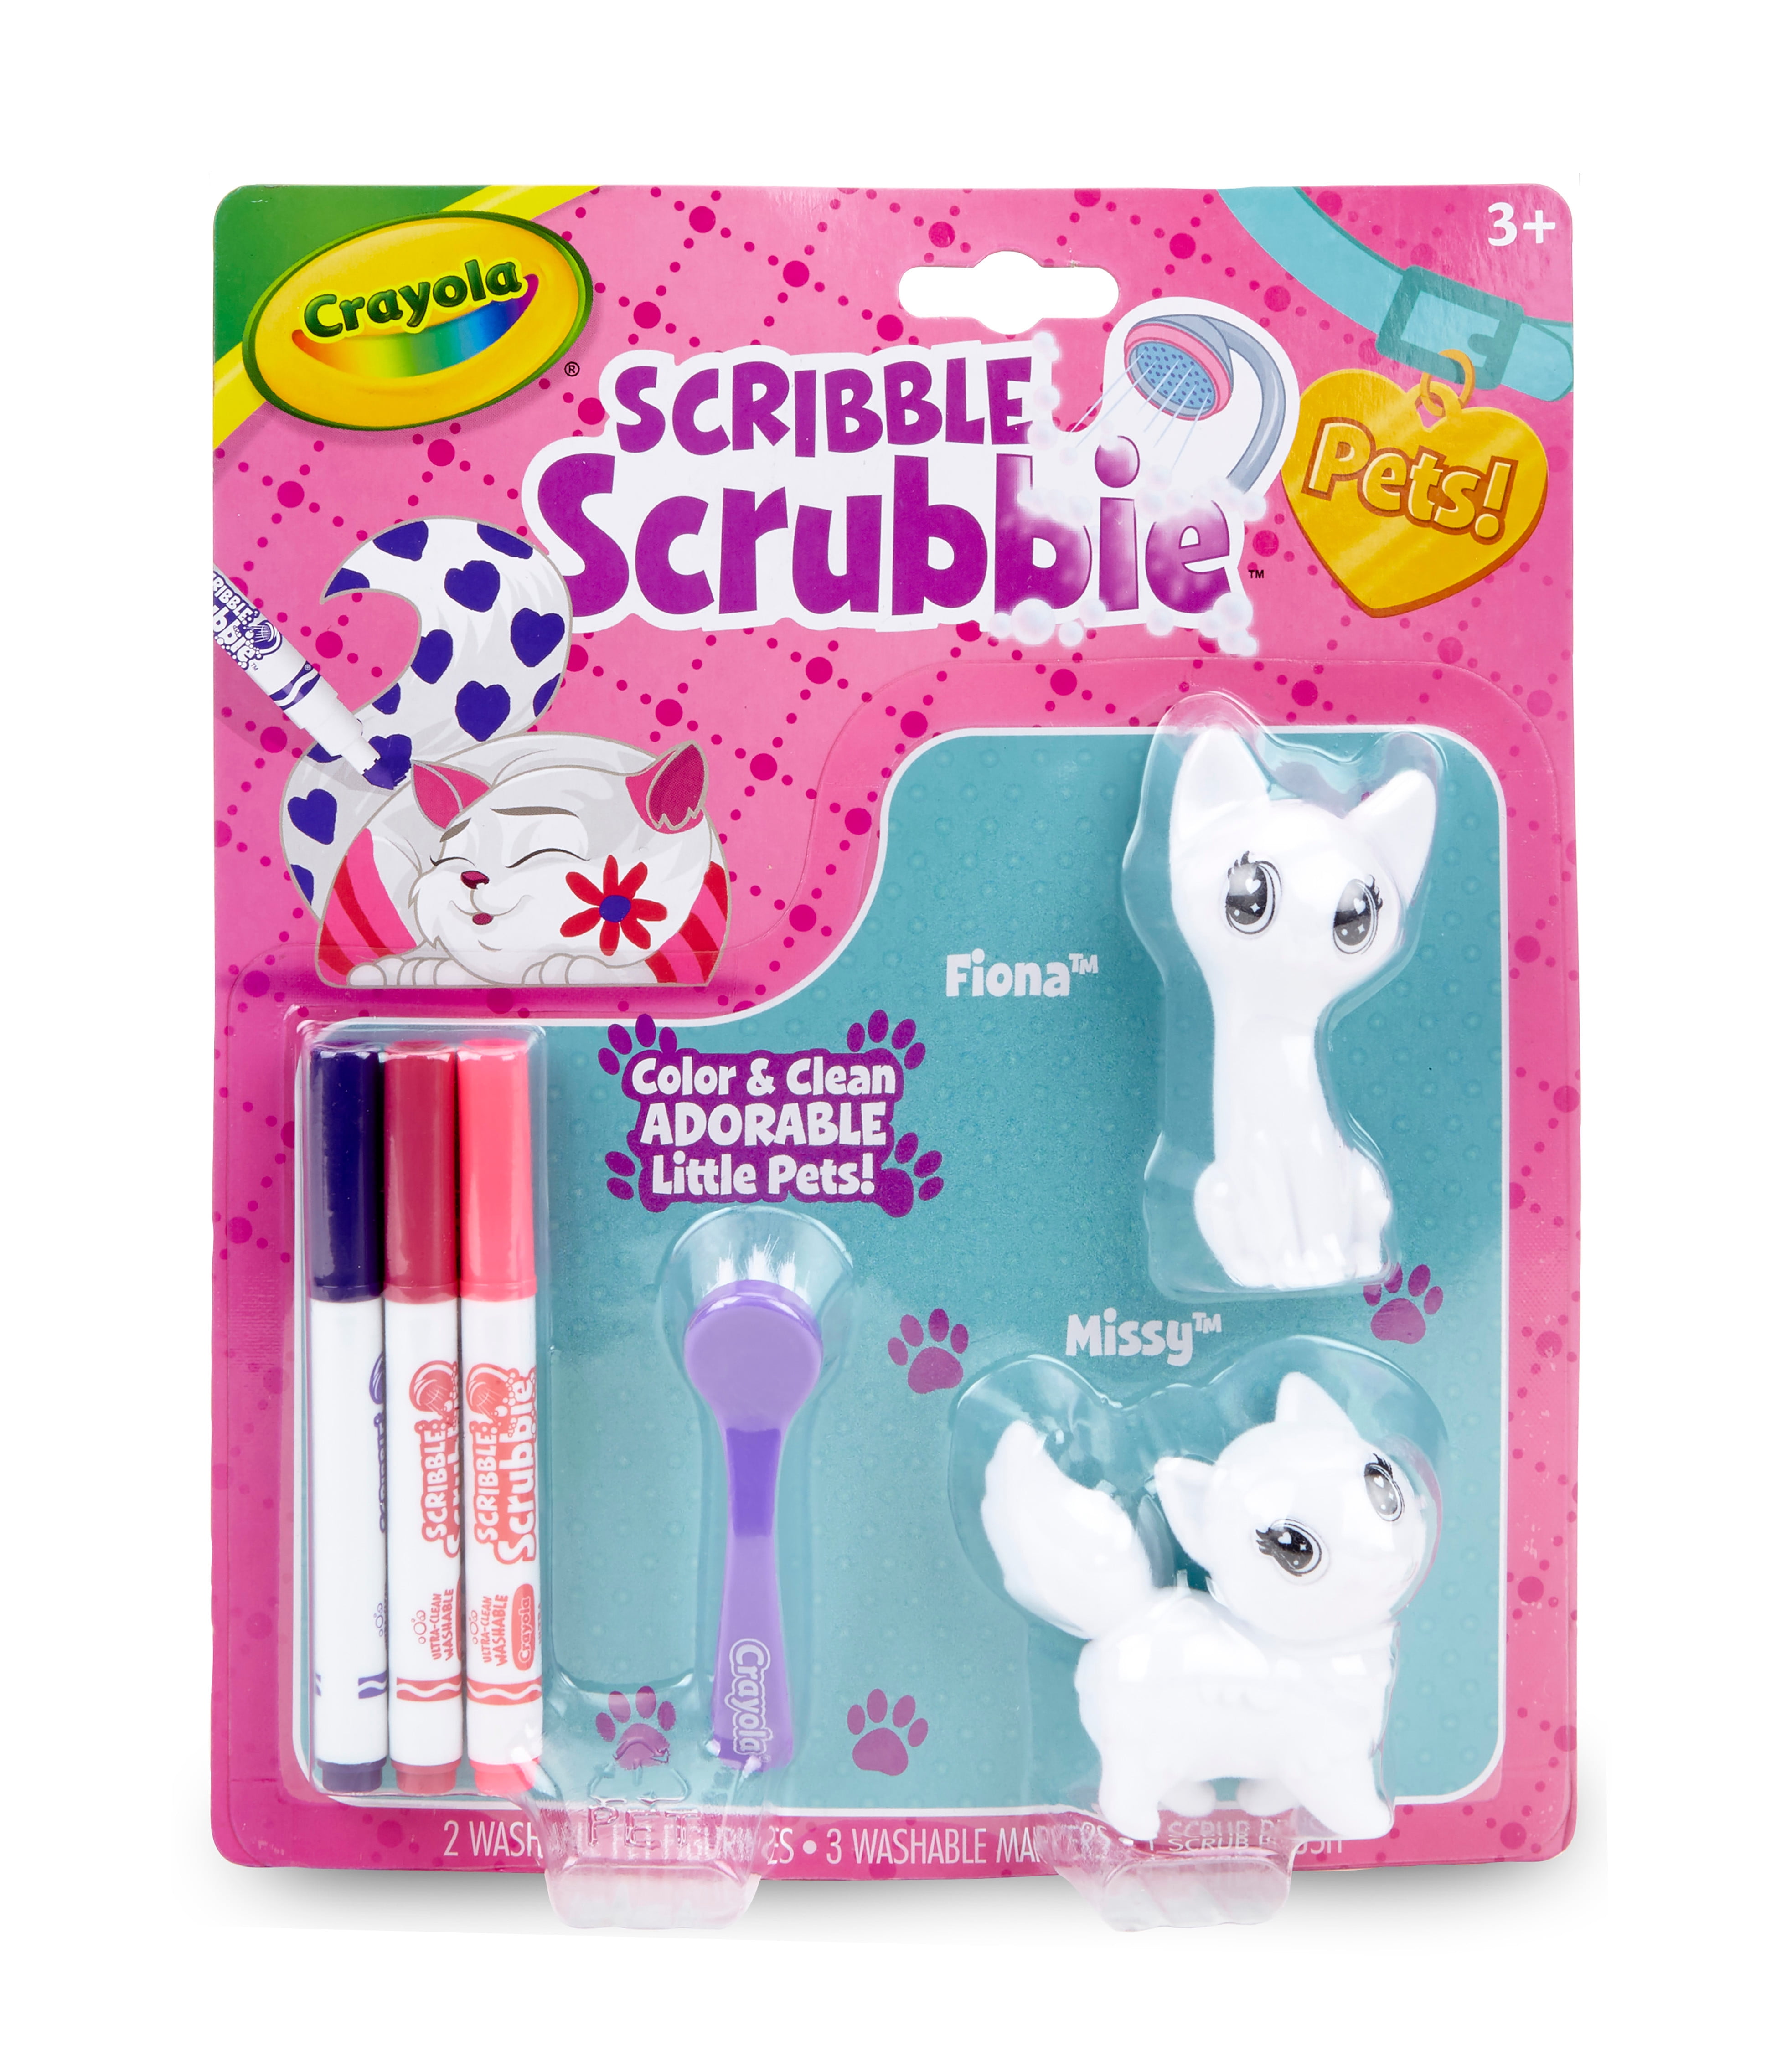 1 Pet Scrub Brush 2 Markers for sale online Crayola Scribble Scrubbie Pets Ages 3 Incl 